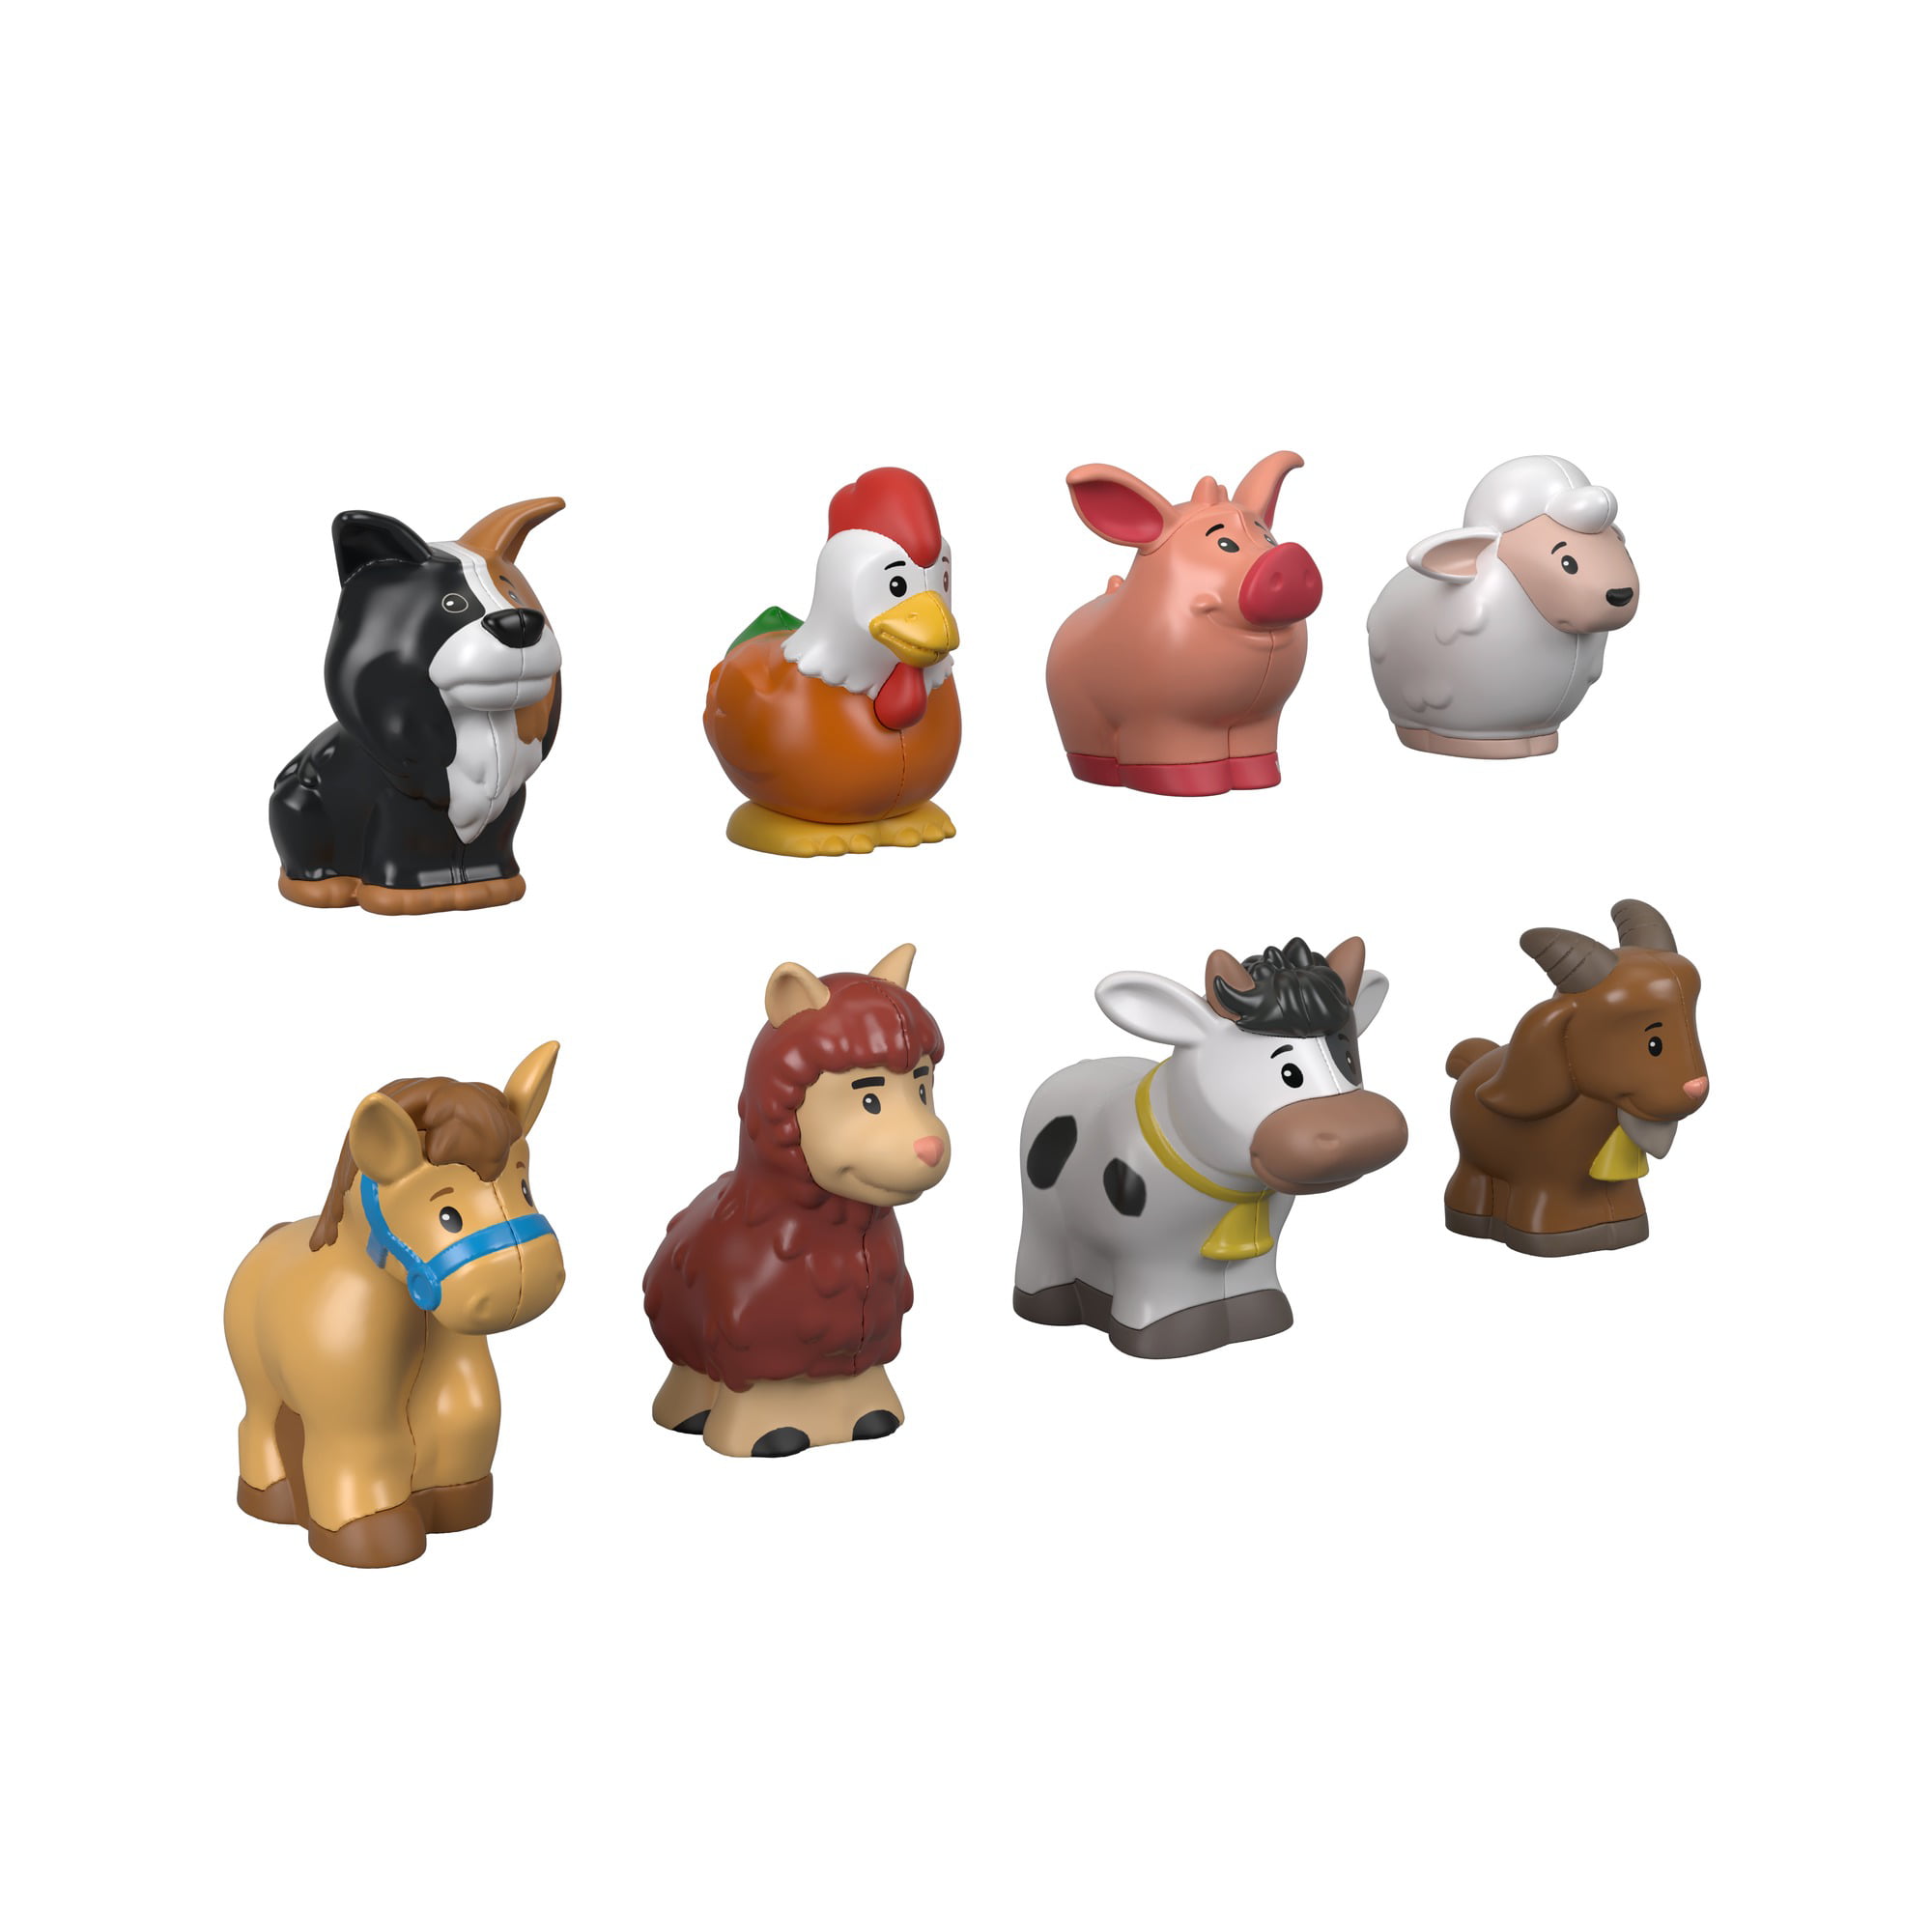 Fisher-Price Little People Farm Animal Friends Action Figures Statues New